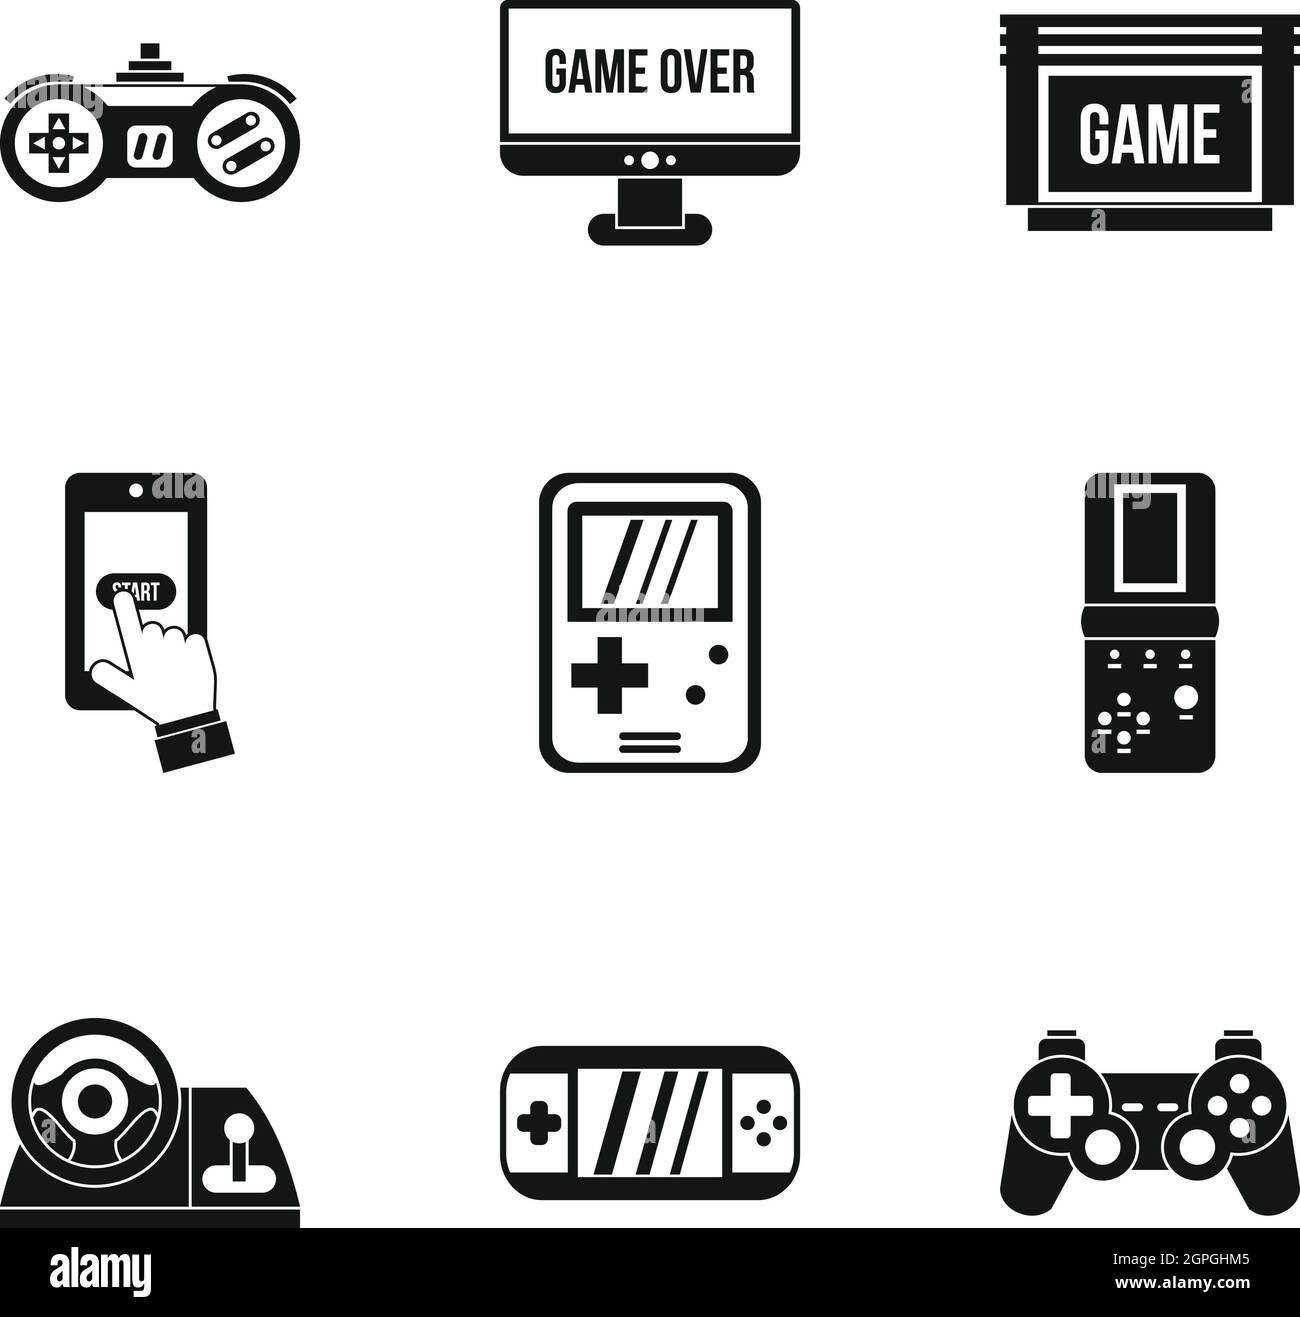 Game console icons set, simple style Stock Vector